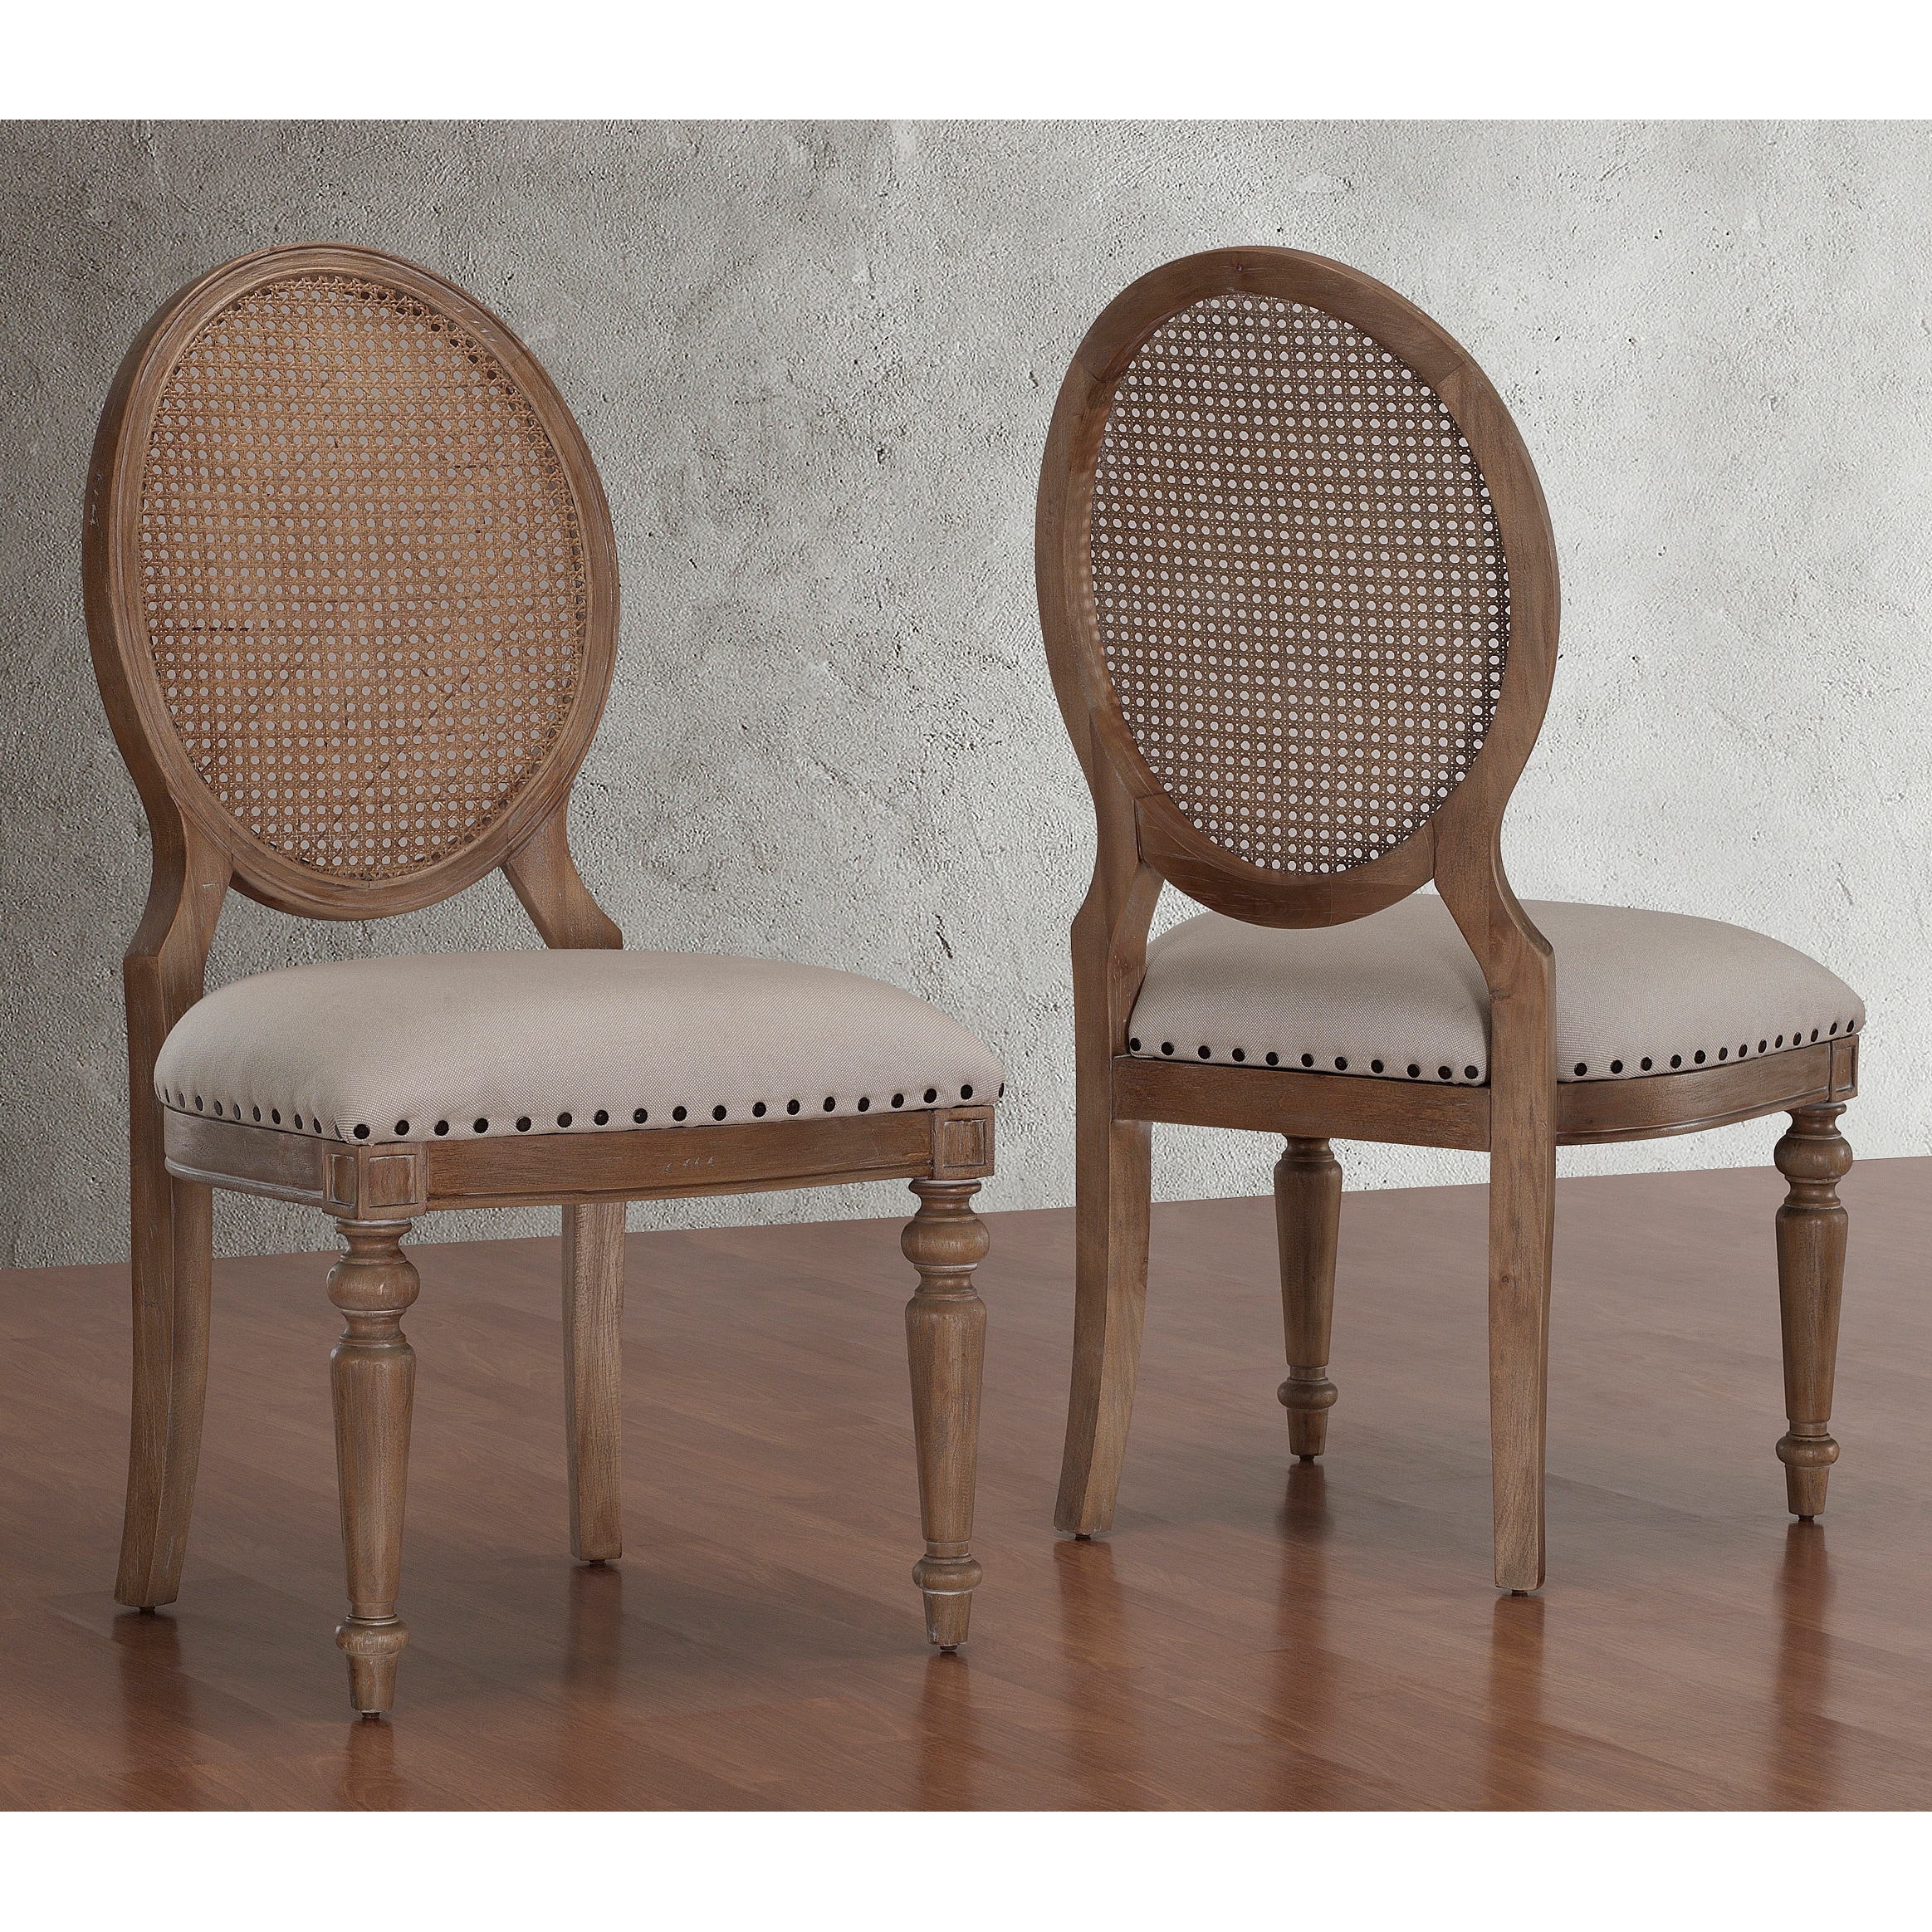 Shop Stones & Stripes Elements Weathered Oak Cane Back Dining Chairs